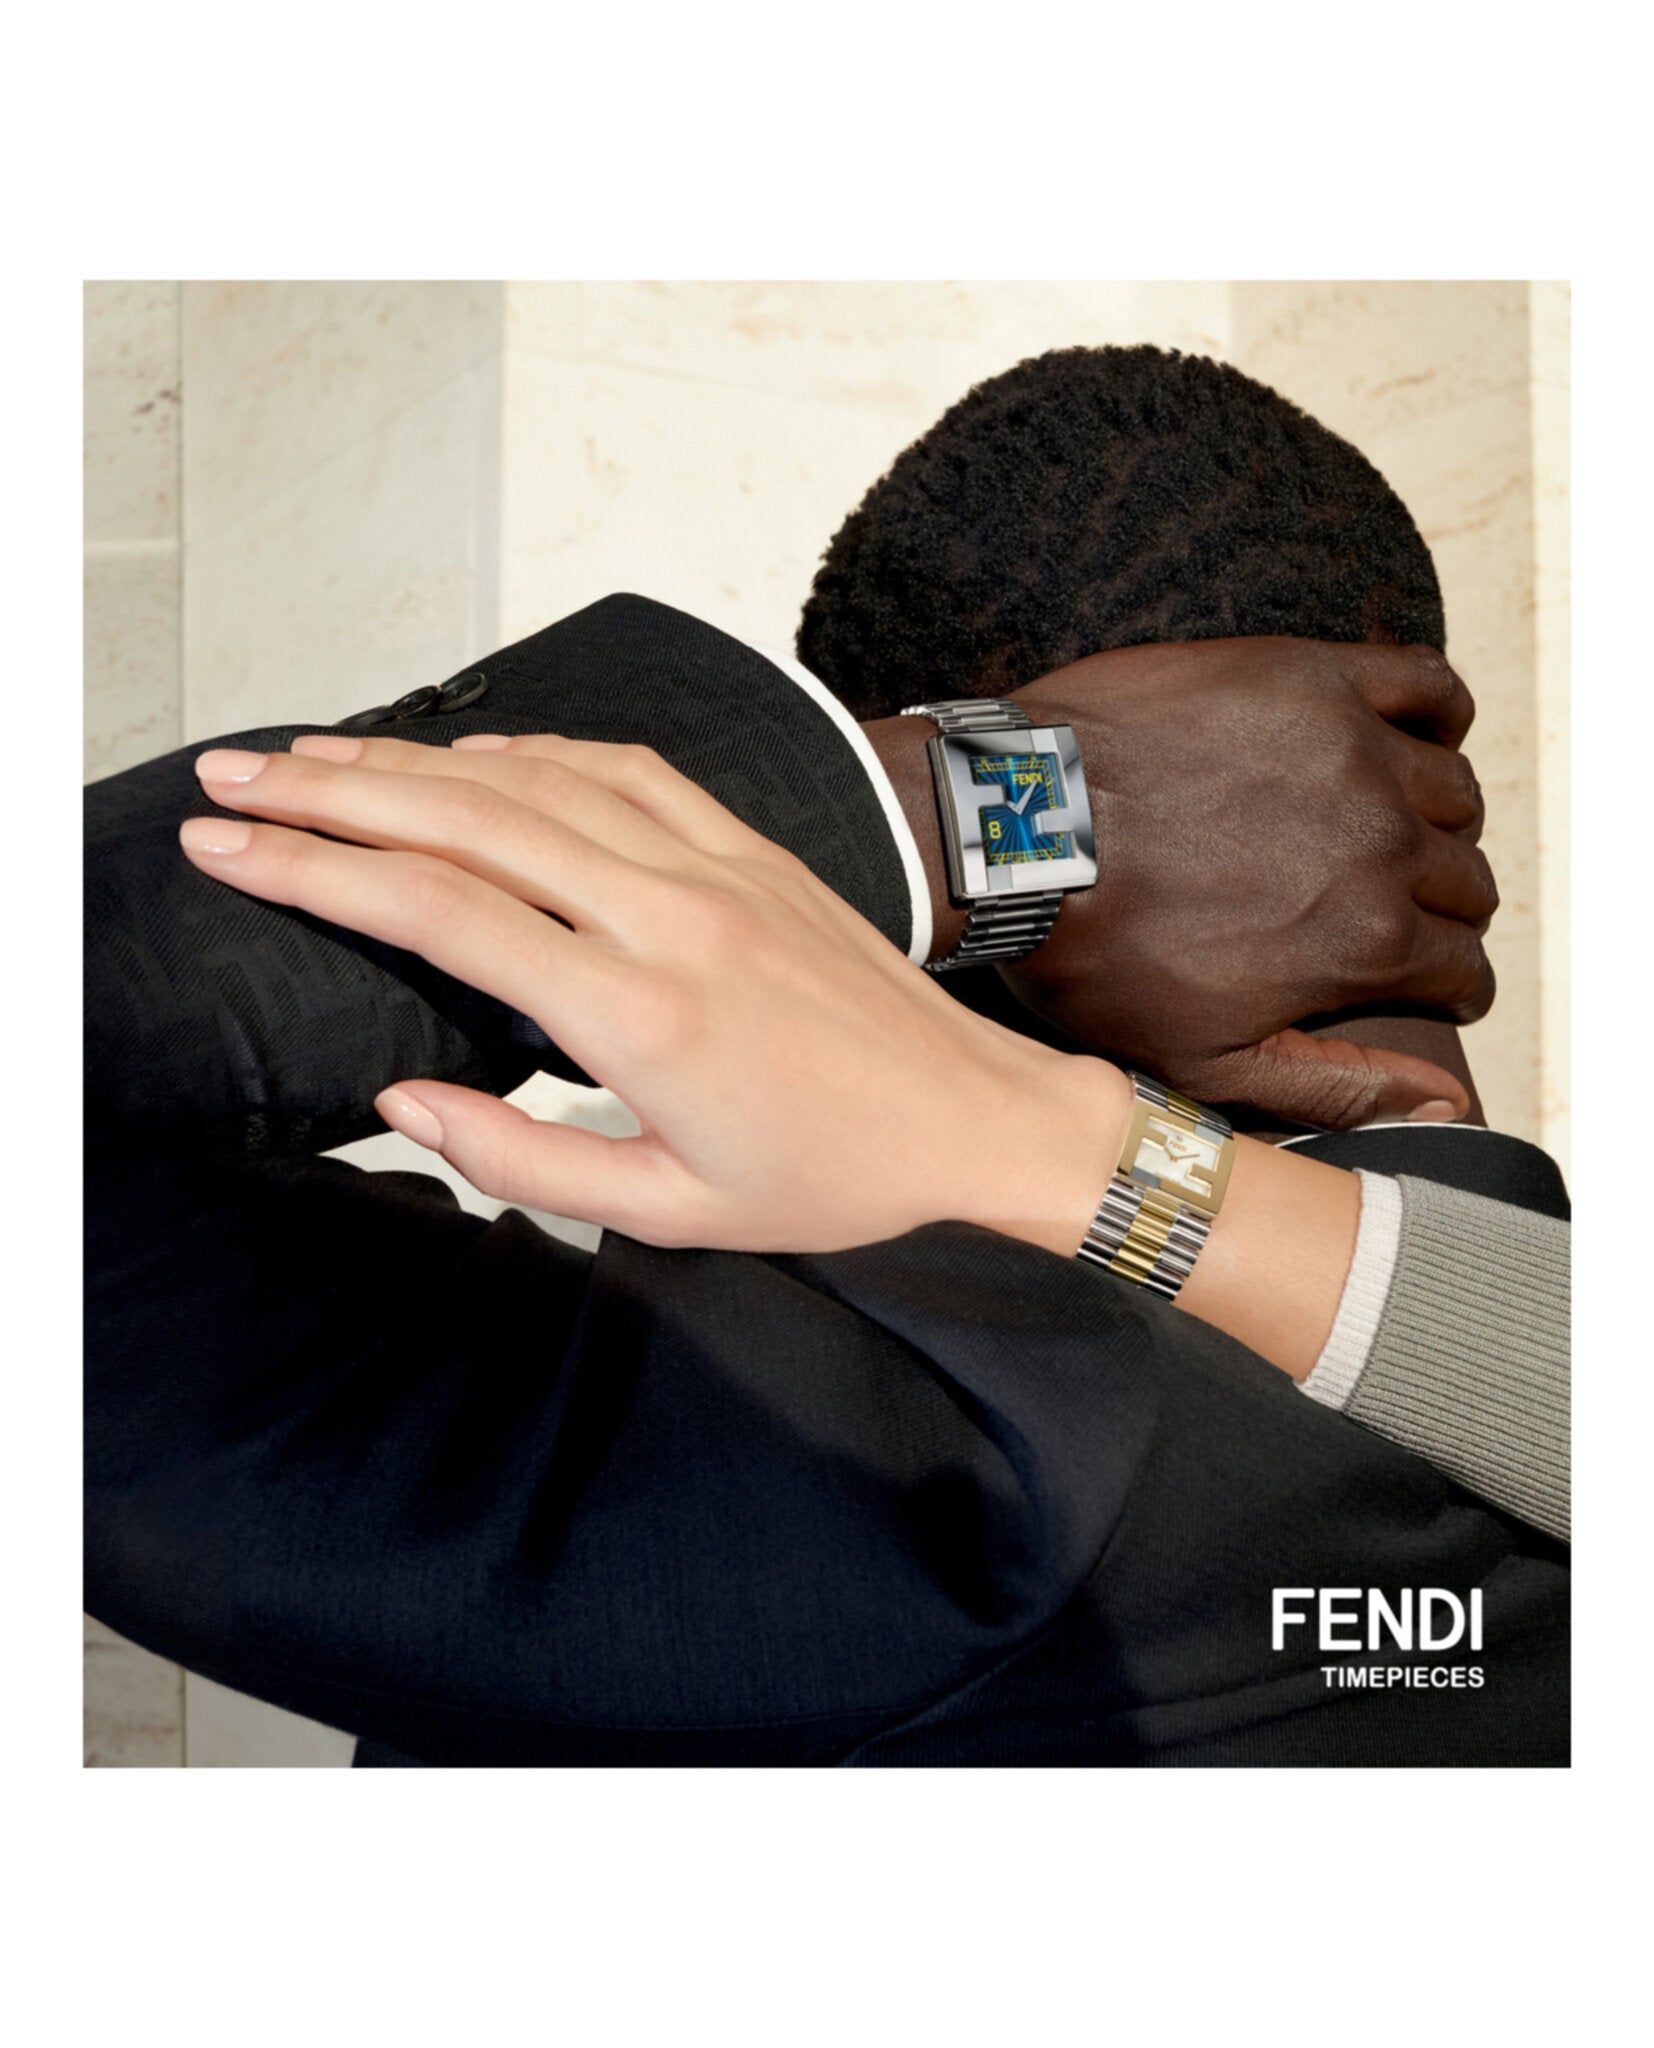 Fendi Mens Fendimania Watches  MadaLuxe Time – Madaluxe Time